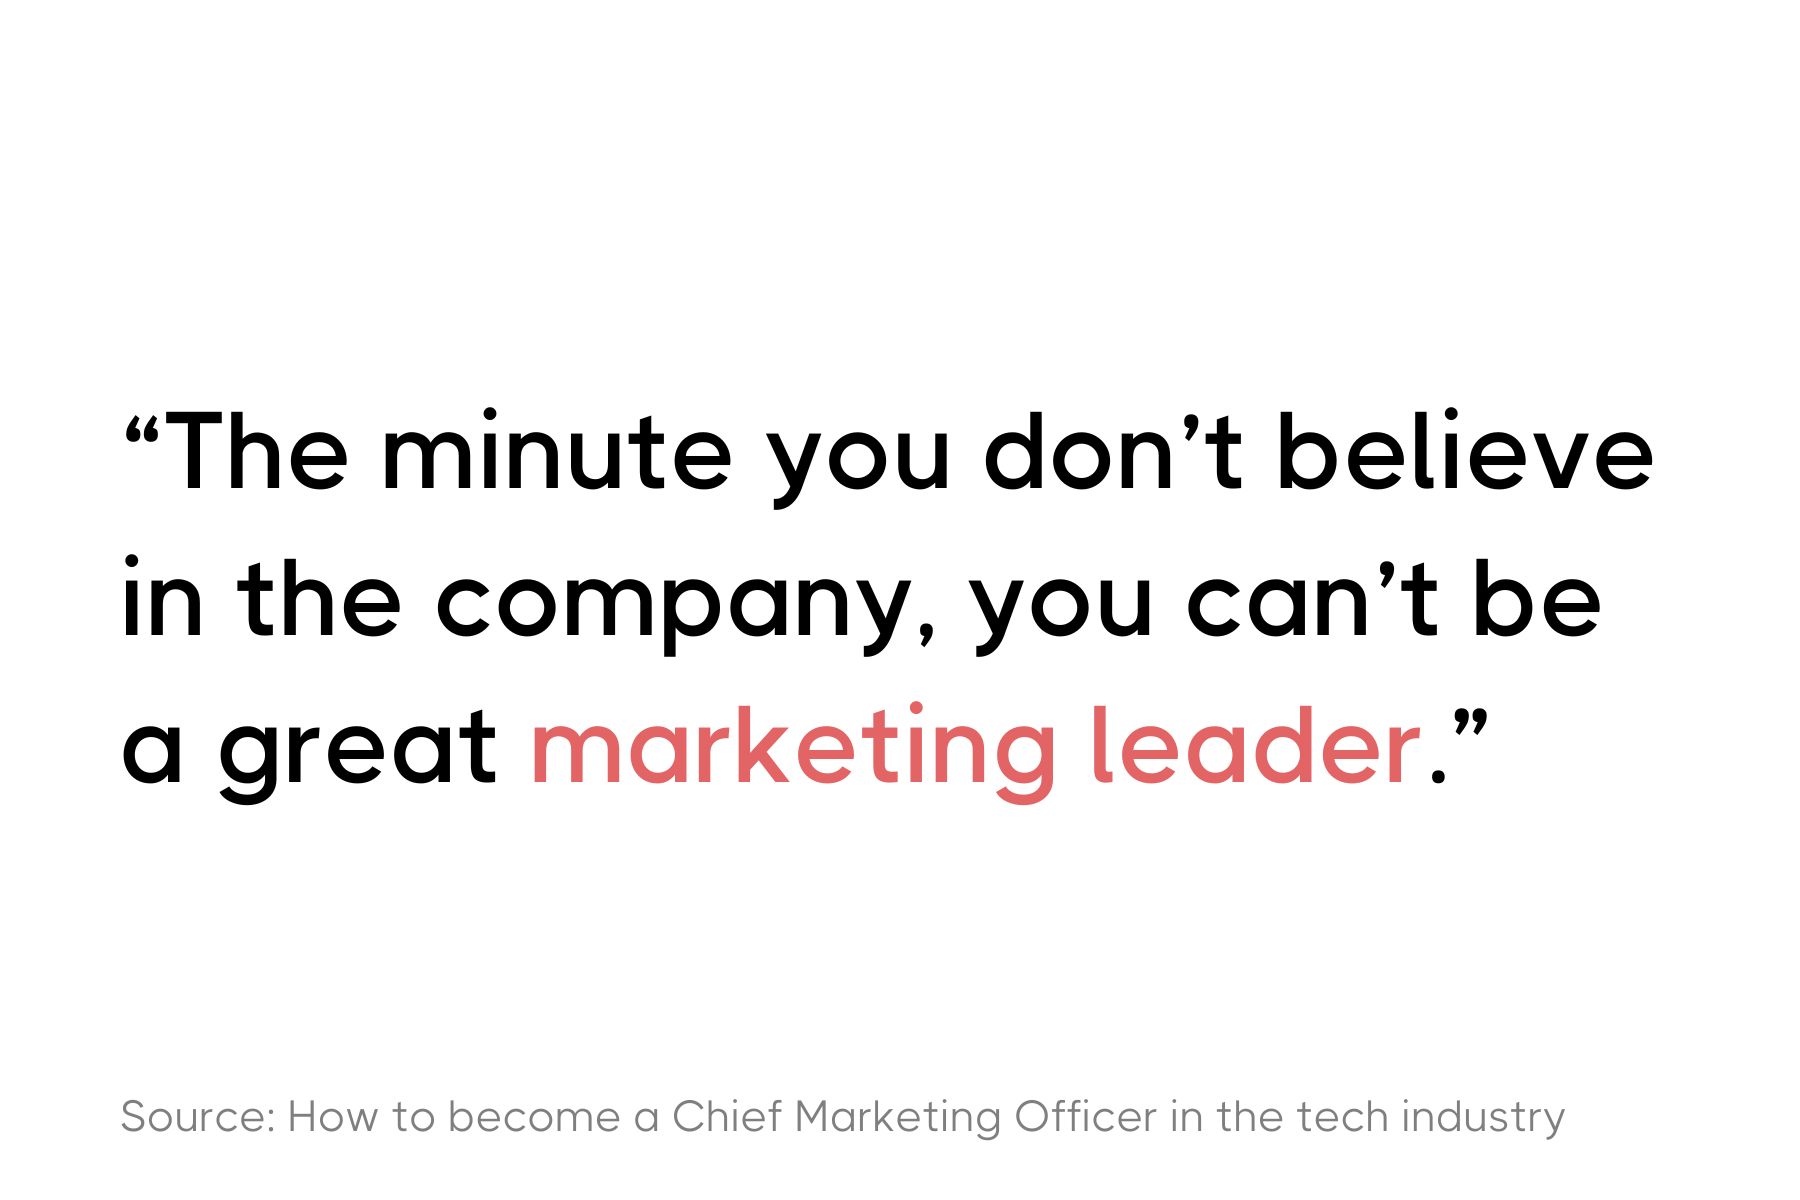 The image features a quote in a bold, sans-serif font, mostly in black with the word  "marketing leader" highlighted in red. The quote says: "The minute you don't believe in the company, you can't be a great marketing leader." Below the quote, there is a source citation in smaller text that reads "Source: How to become a Chief Marketing Officer in the tech industry."